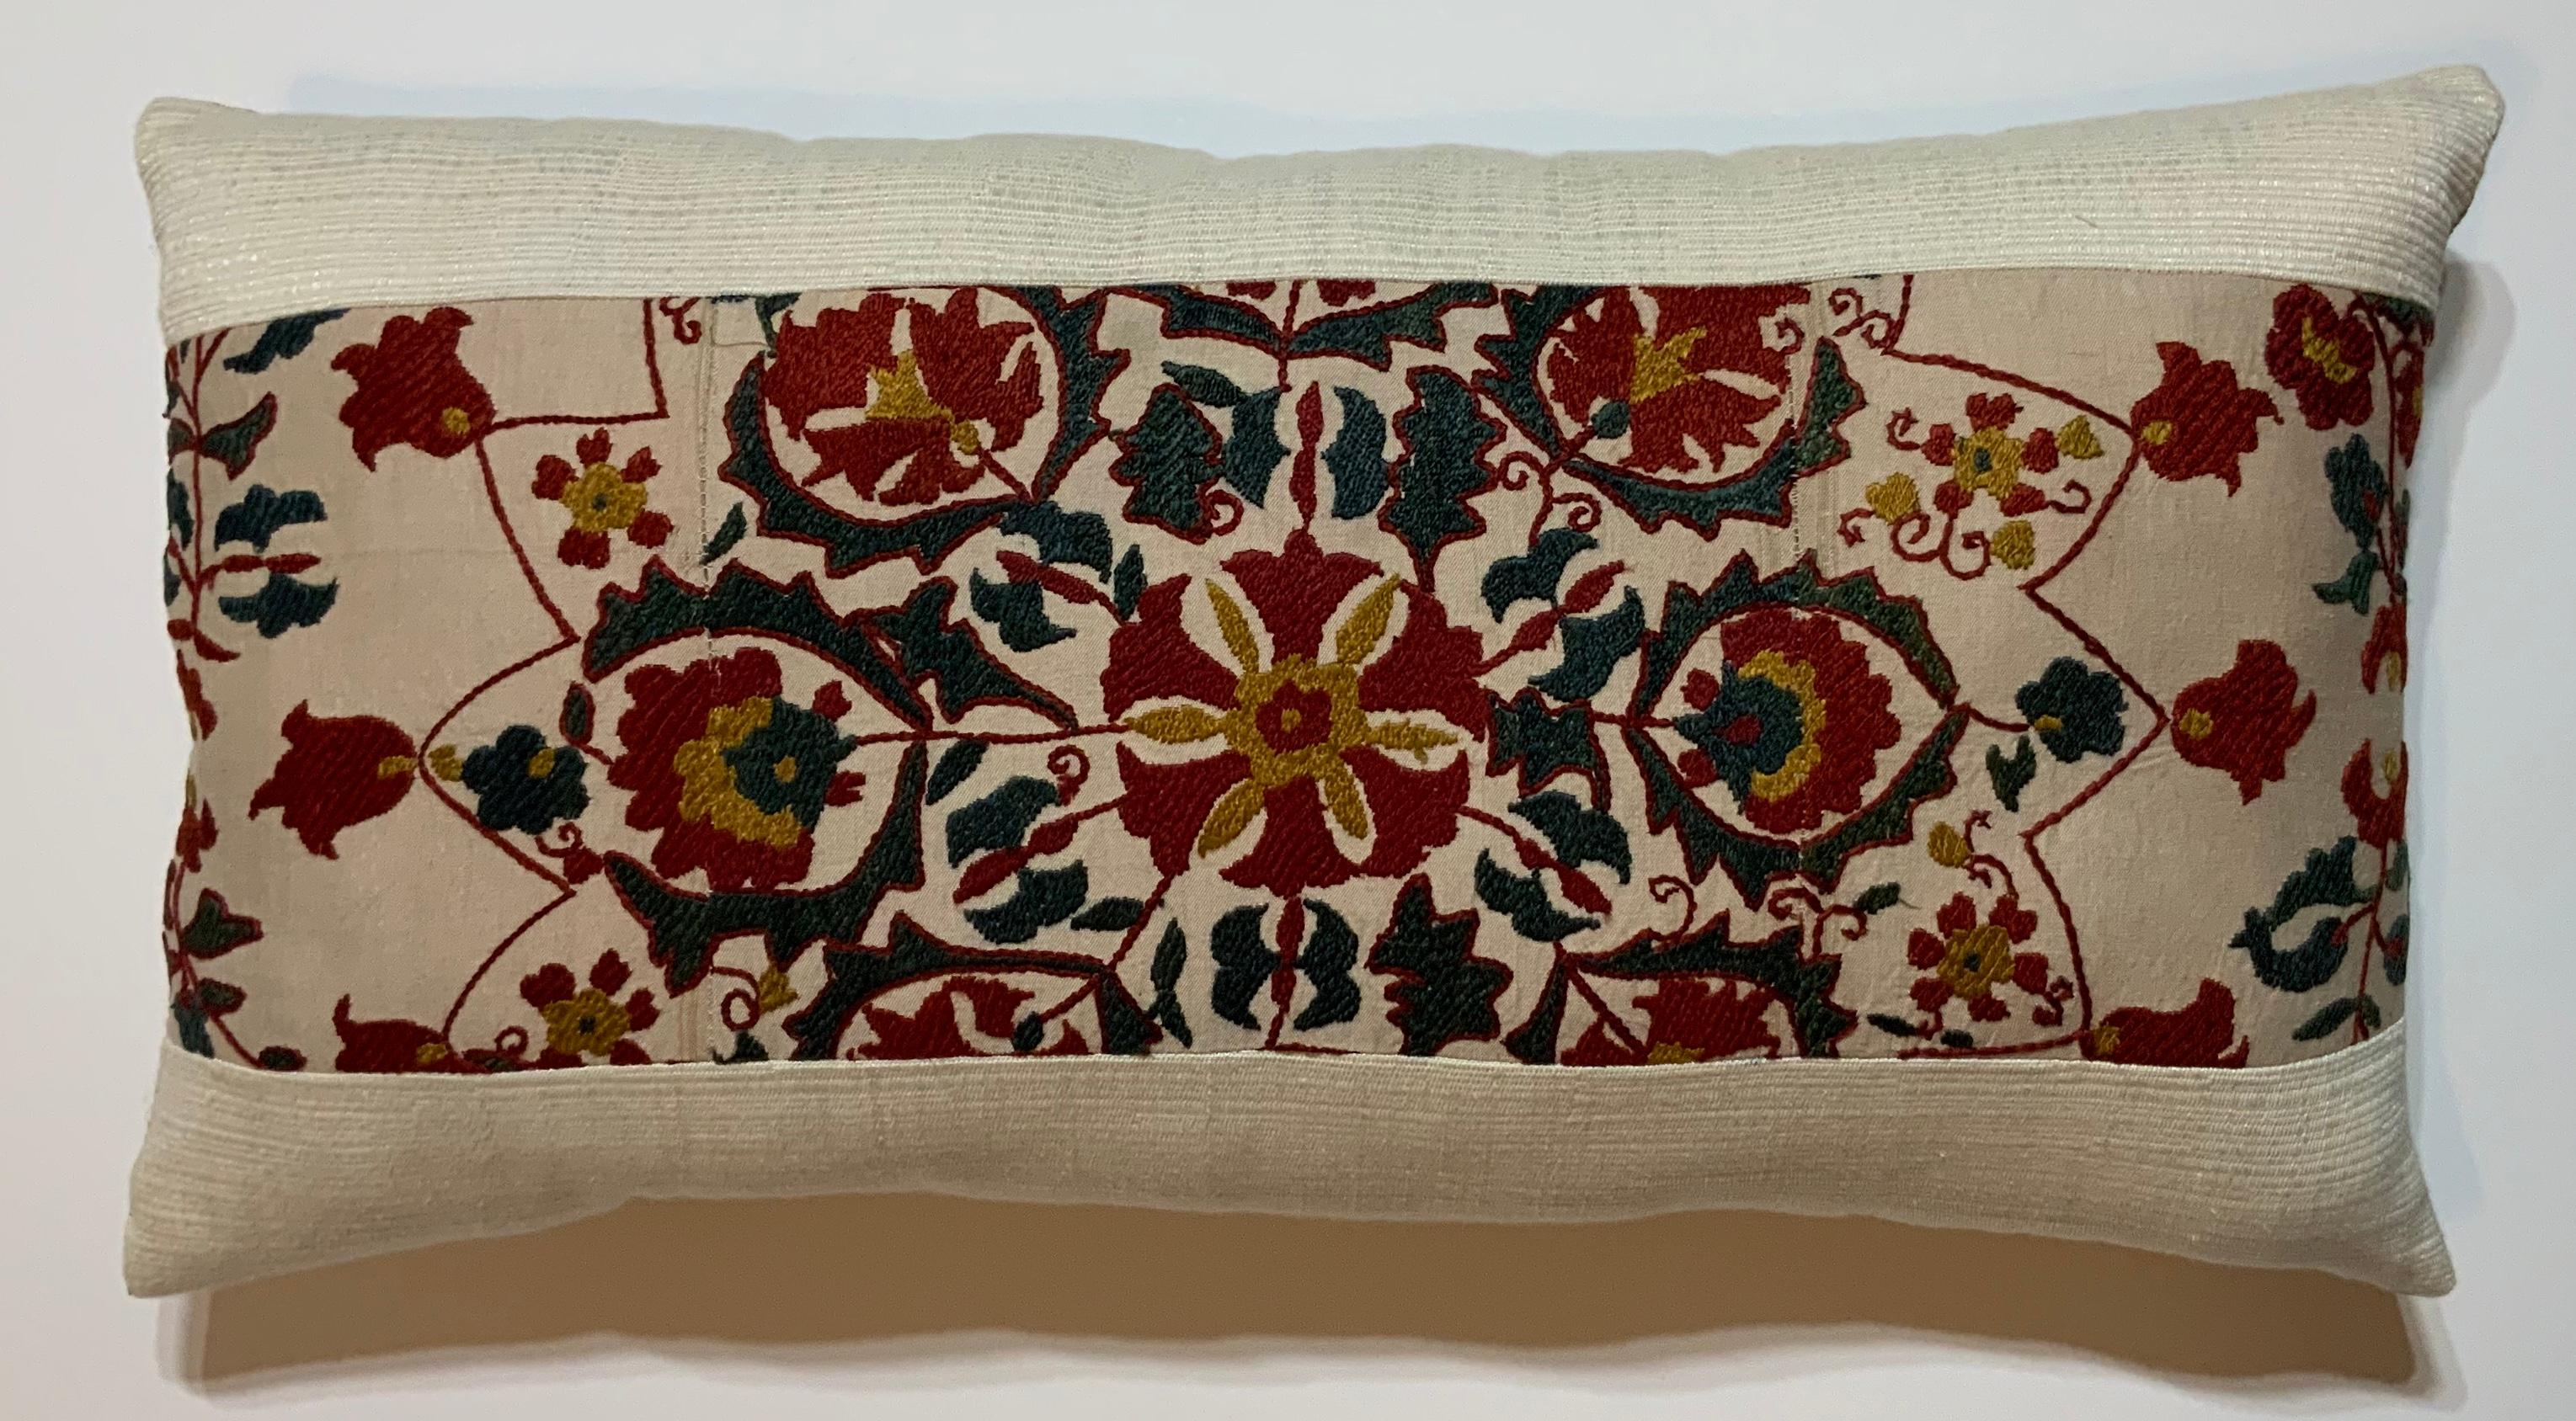 Beautiful pillow made of hand embroidery silk, on cream color background, exceptional flowers and vine motifs all around, silk backing, fresh new insert.